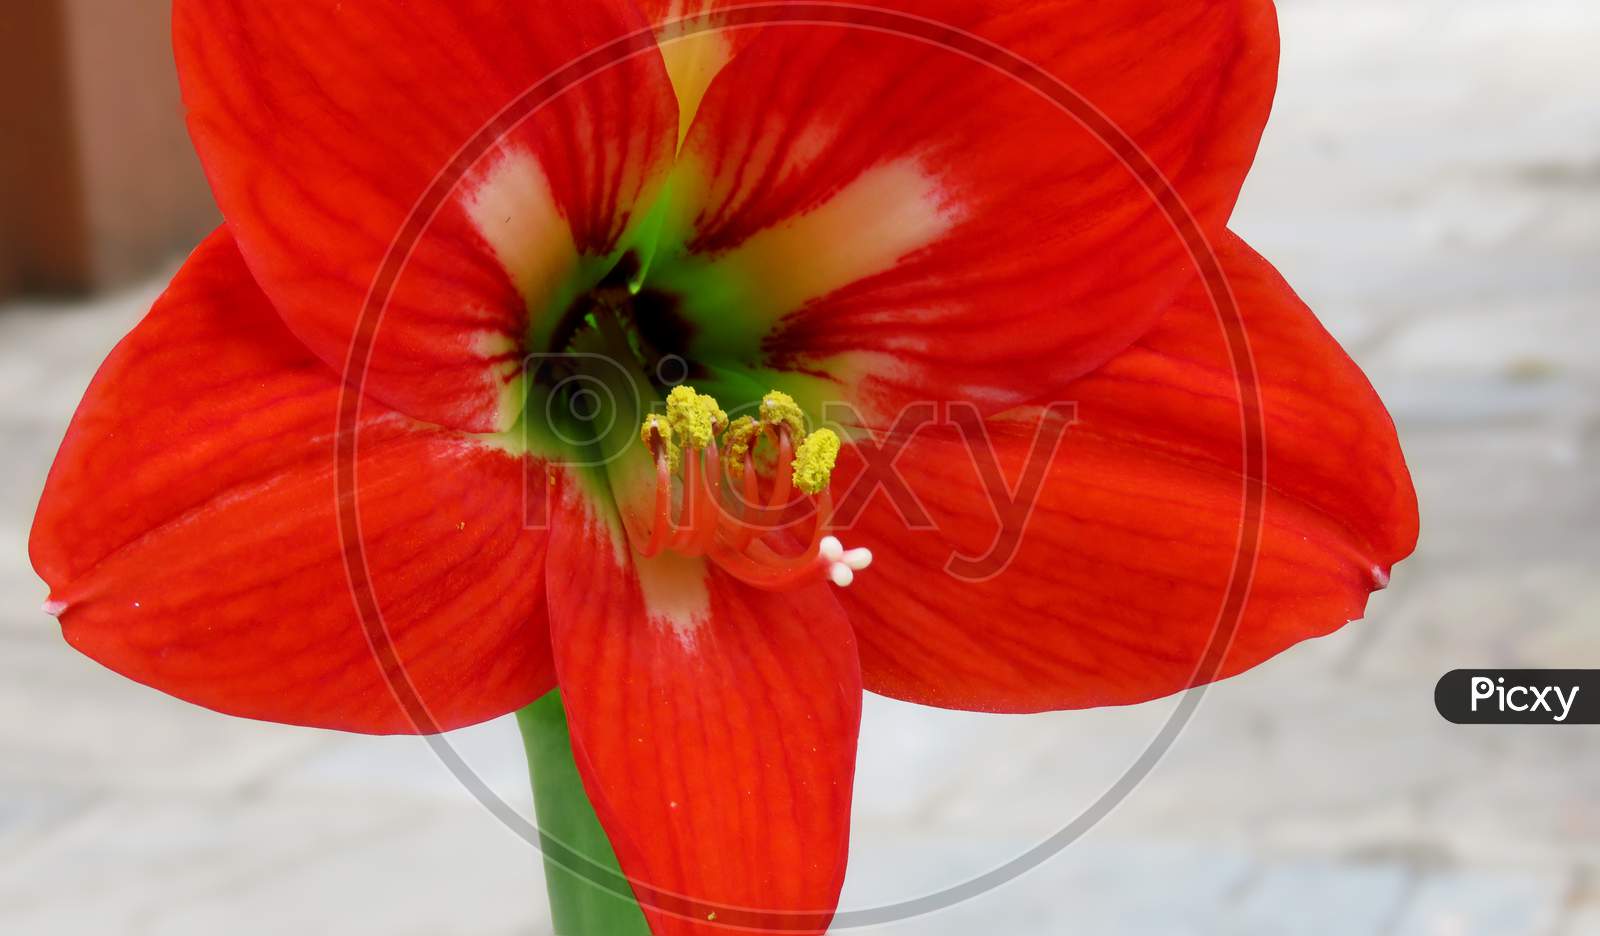 Red Amaryllis flower,Close up of a Beautiful Red Amaryllis flower